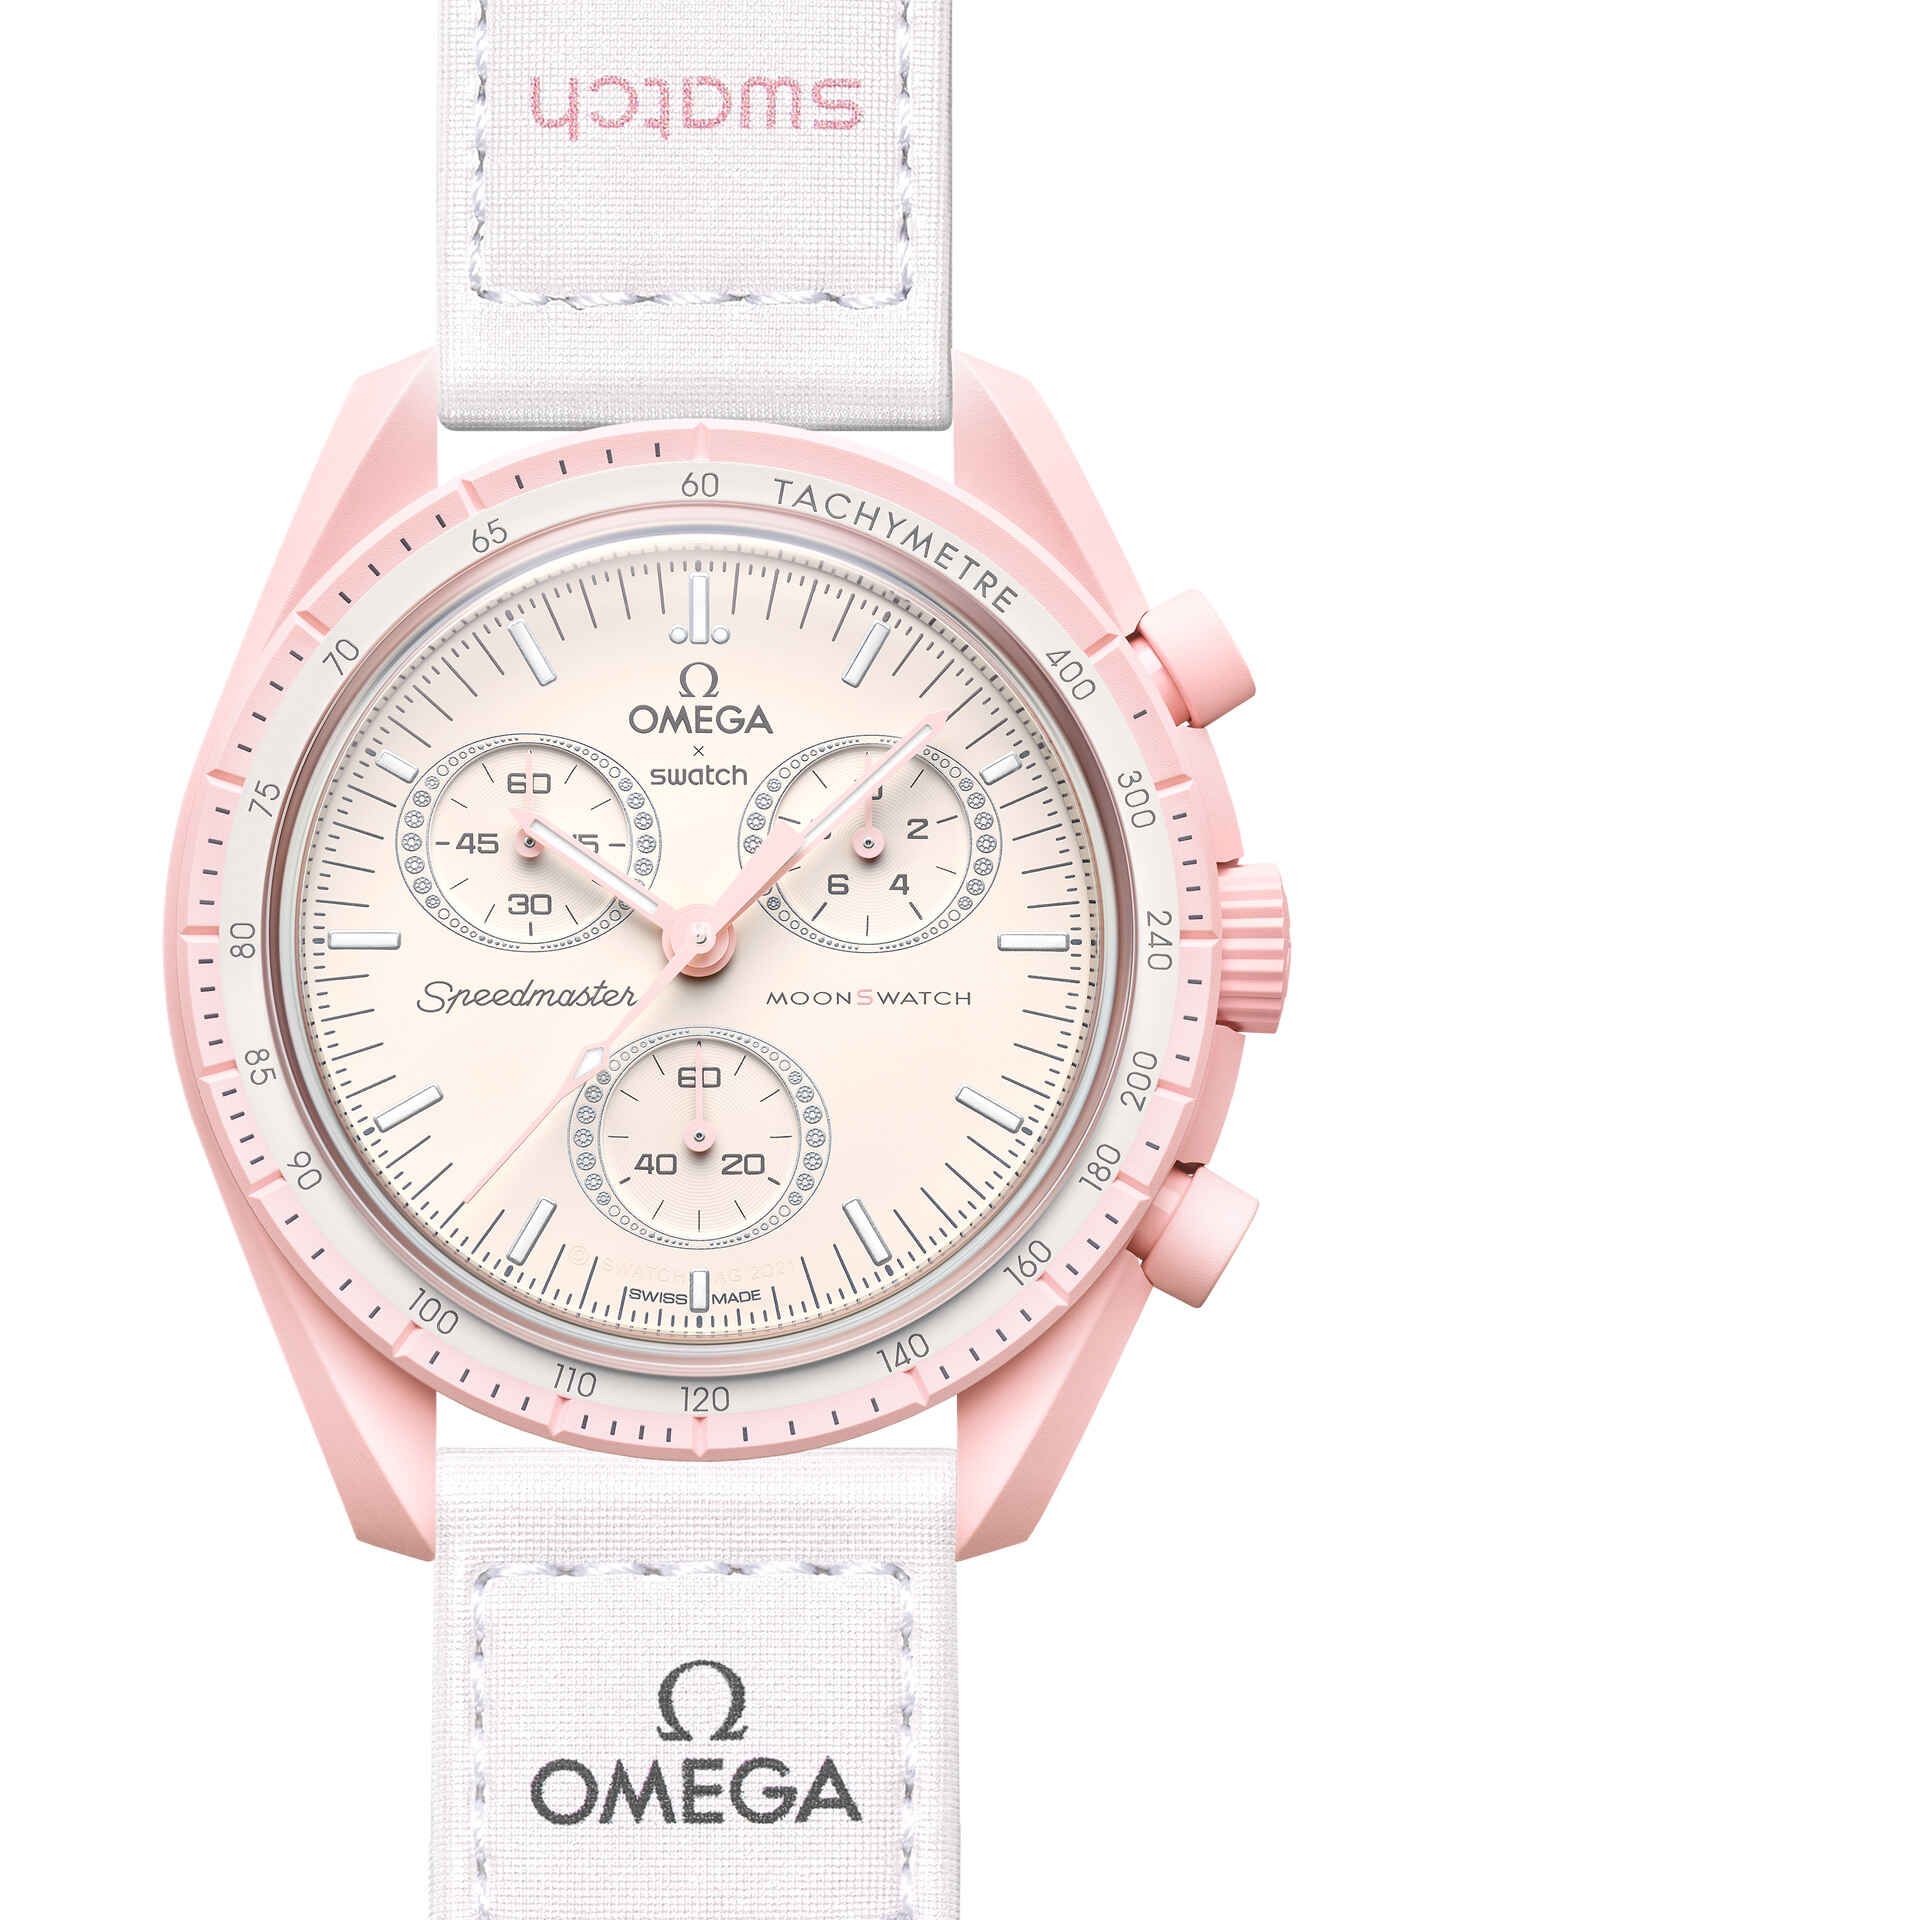 SWATCH X OMEGA MISSION TO VENUS COLLAB SWATCH OMEGA SOLD OUT È la fusione dell'i&hellip;